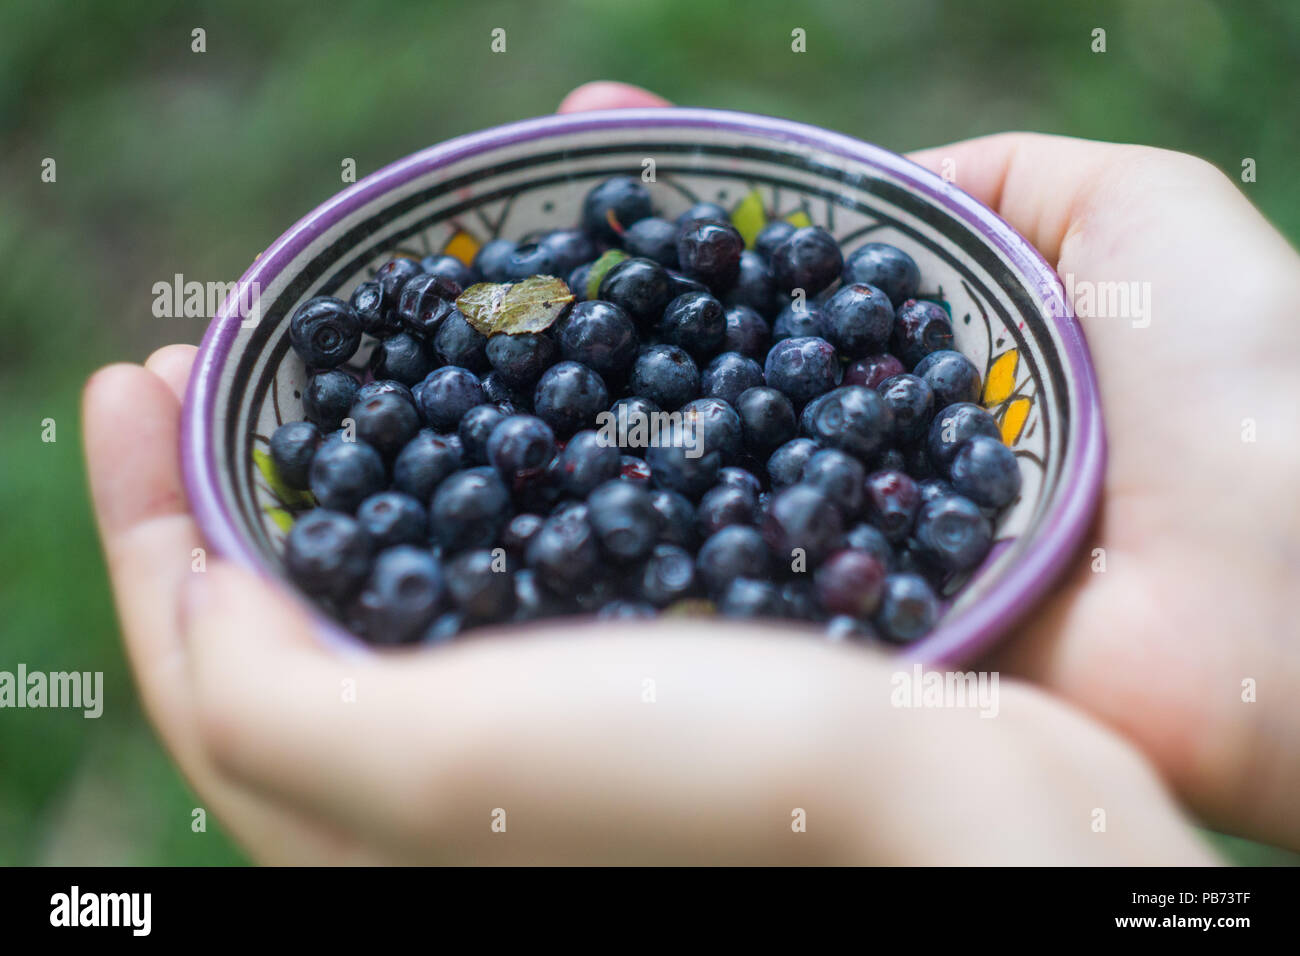 Ripe forest blueberries (bilberry, whortleberry, blaeberry, huckleberry) in a patterned bowl in the hands of a young woman or girl Stock Photo